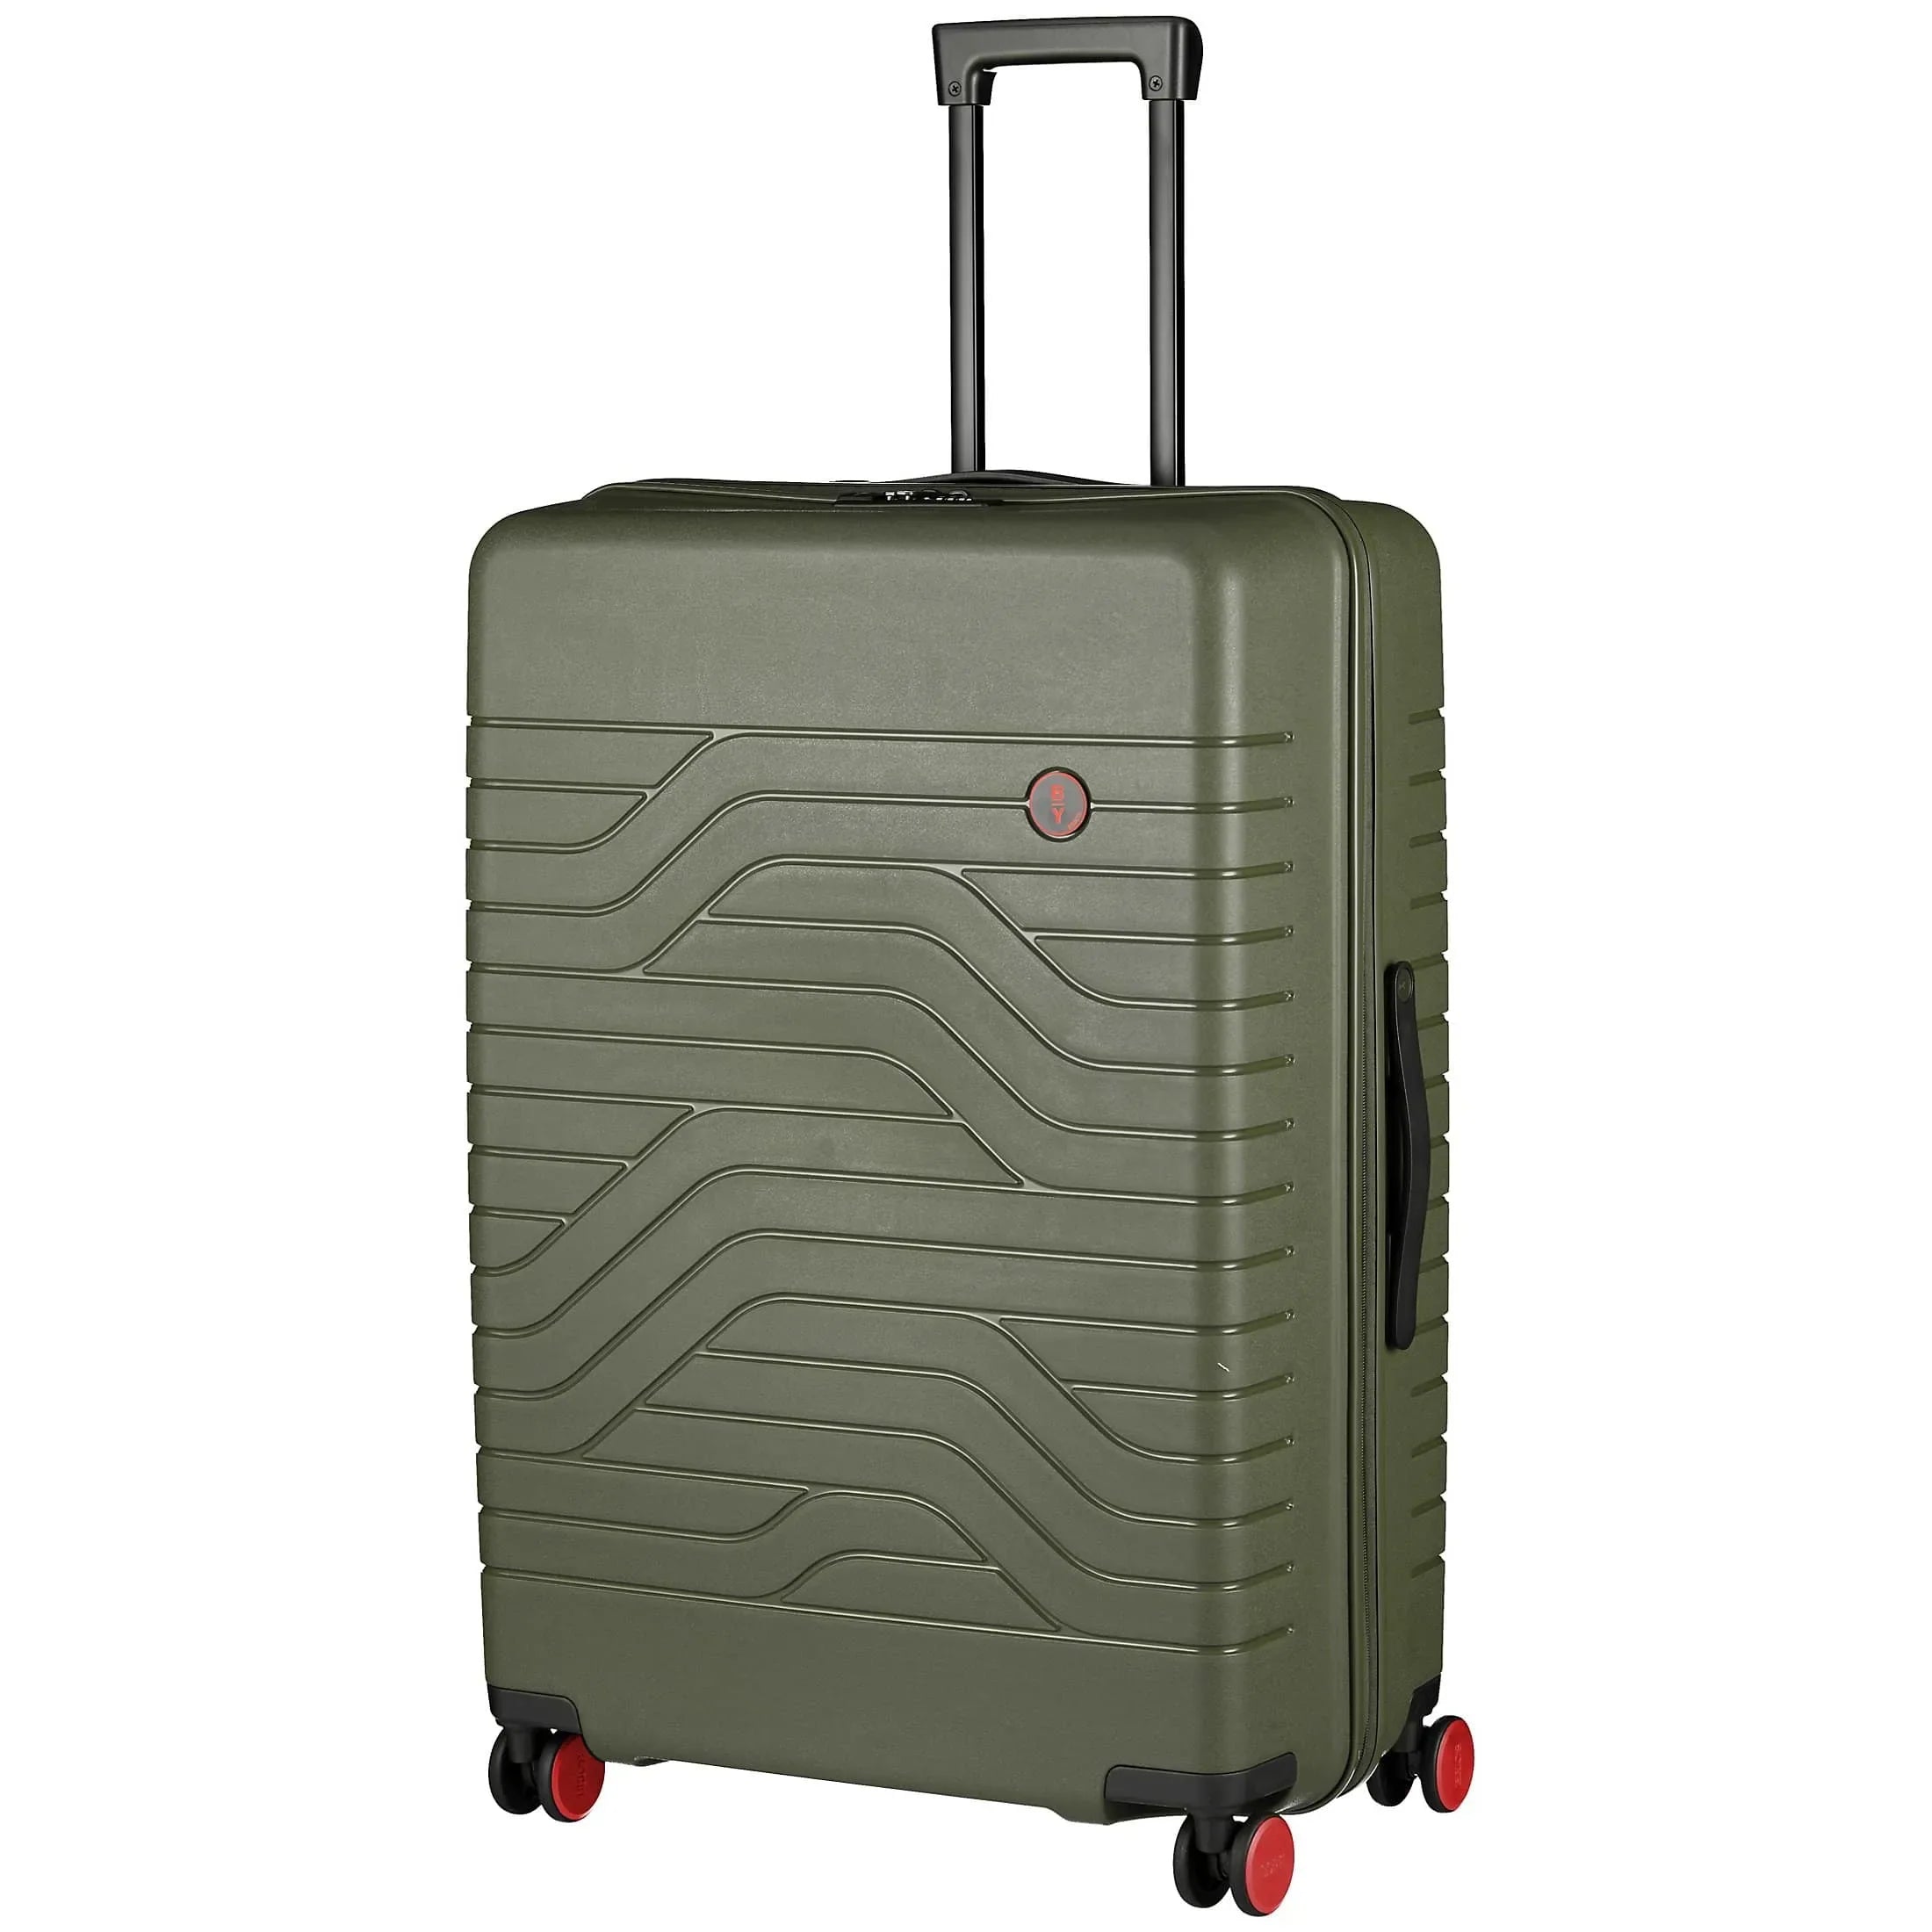 BY by Brics Ulisse 4-Rollen Trolley 79 cm - olive